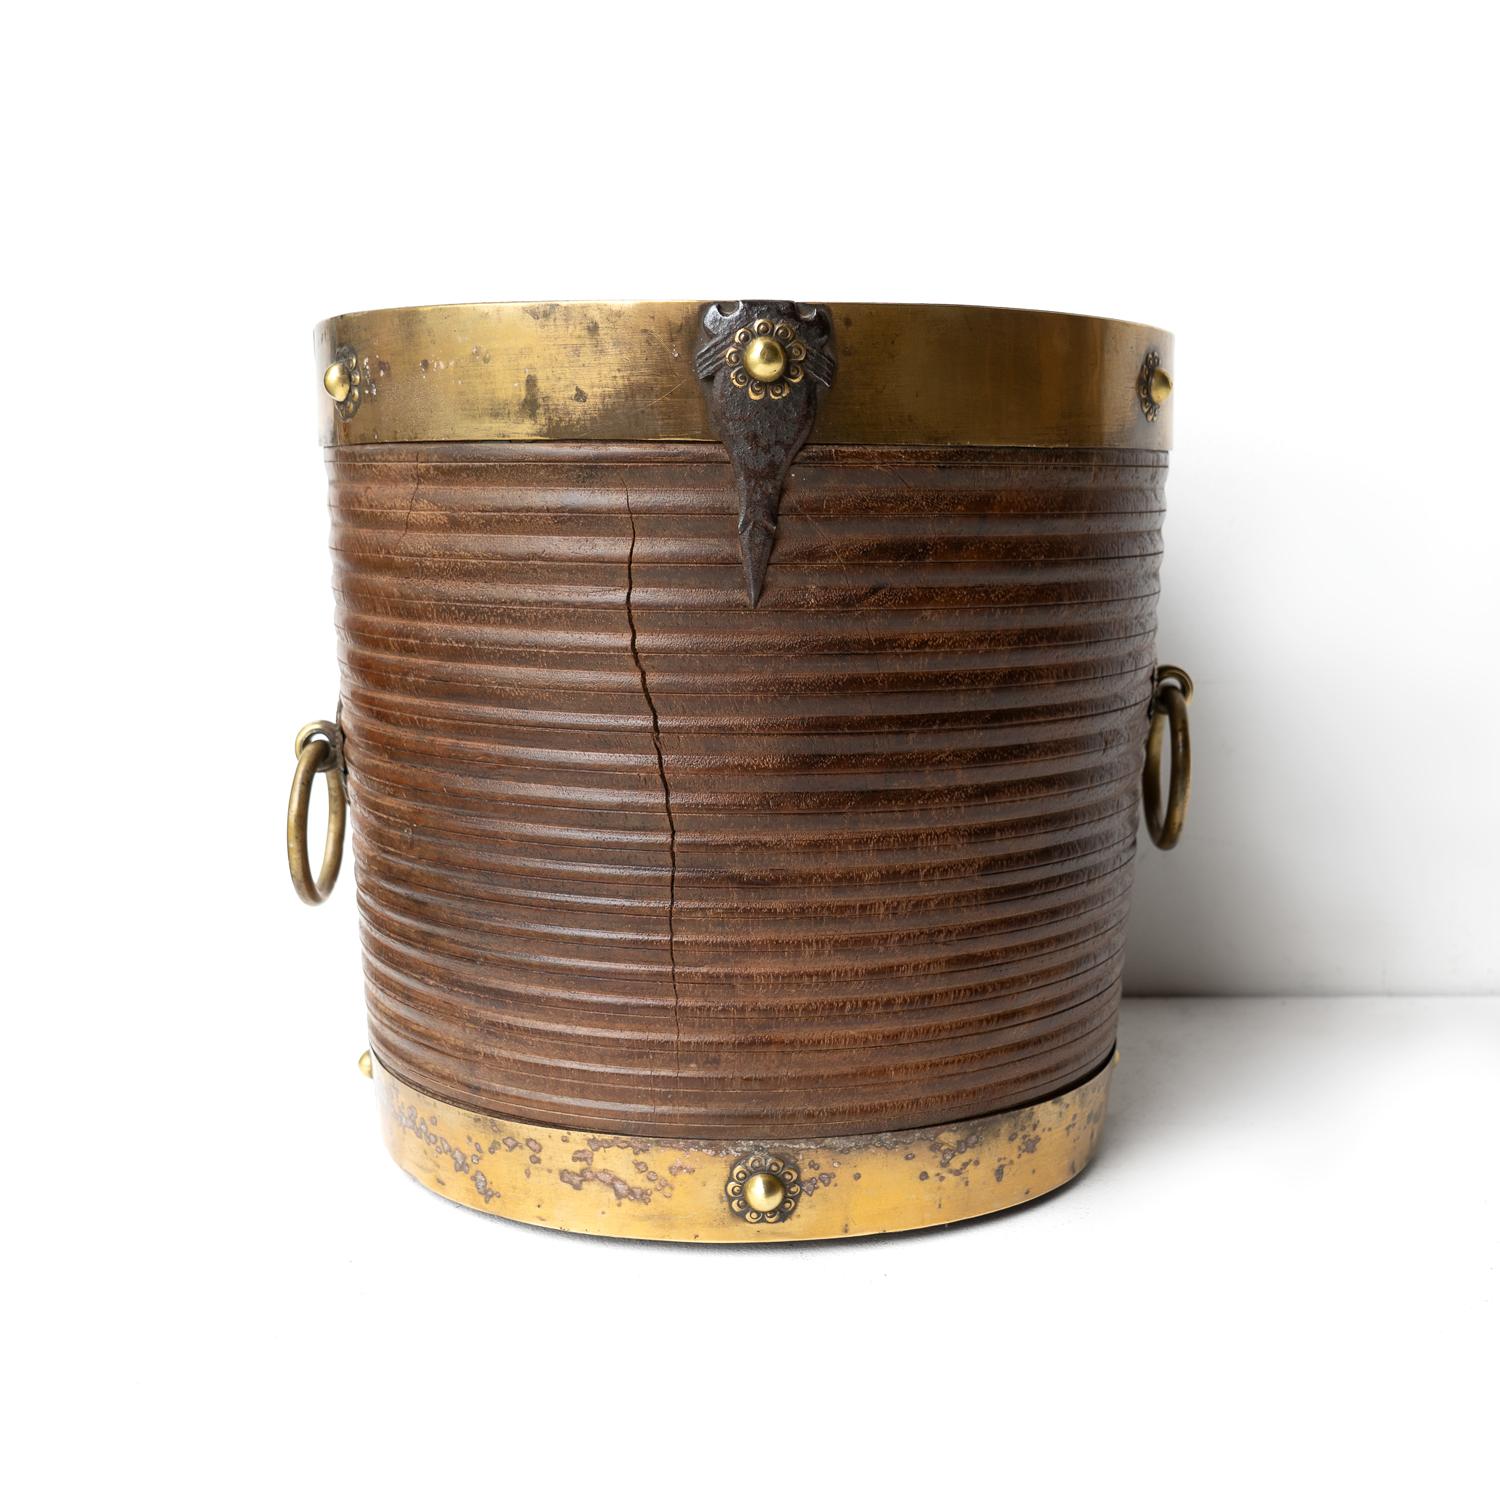 ANTIQUE ANGLO-INDIAN BUCKET STORAGE CONTAINER 

Originally used for measuring grain, usually rice and known locally as a ‘Padi’ or ‘Pari’. Could be used for any number of modern purposes and a highly decorative object in its own right. 

Originating